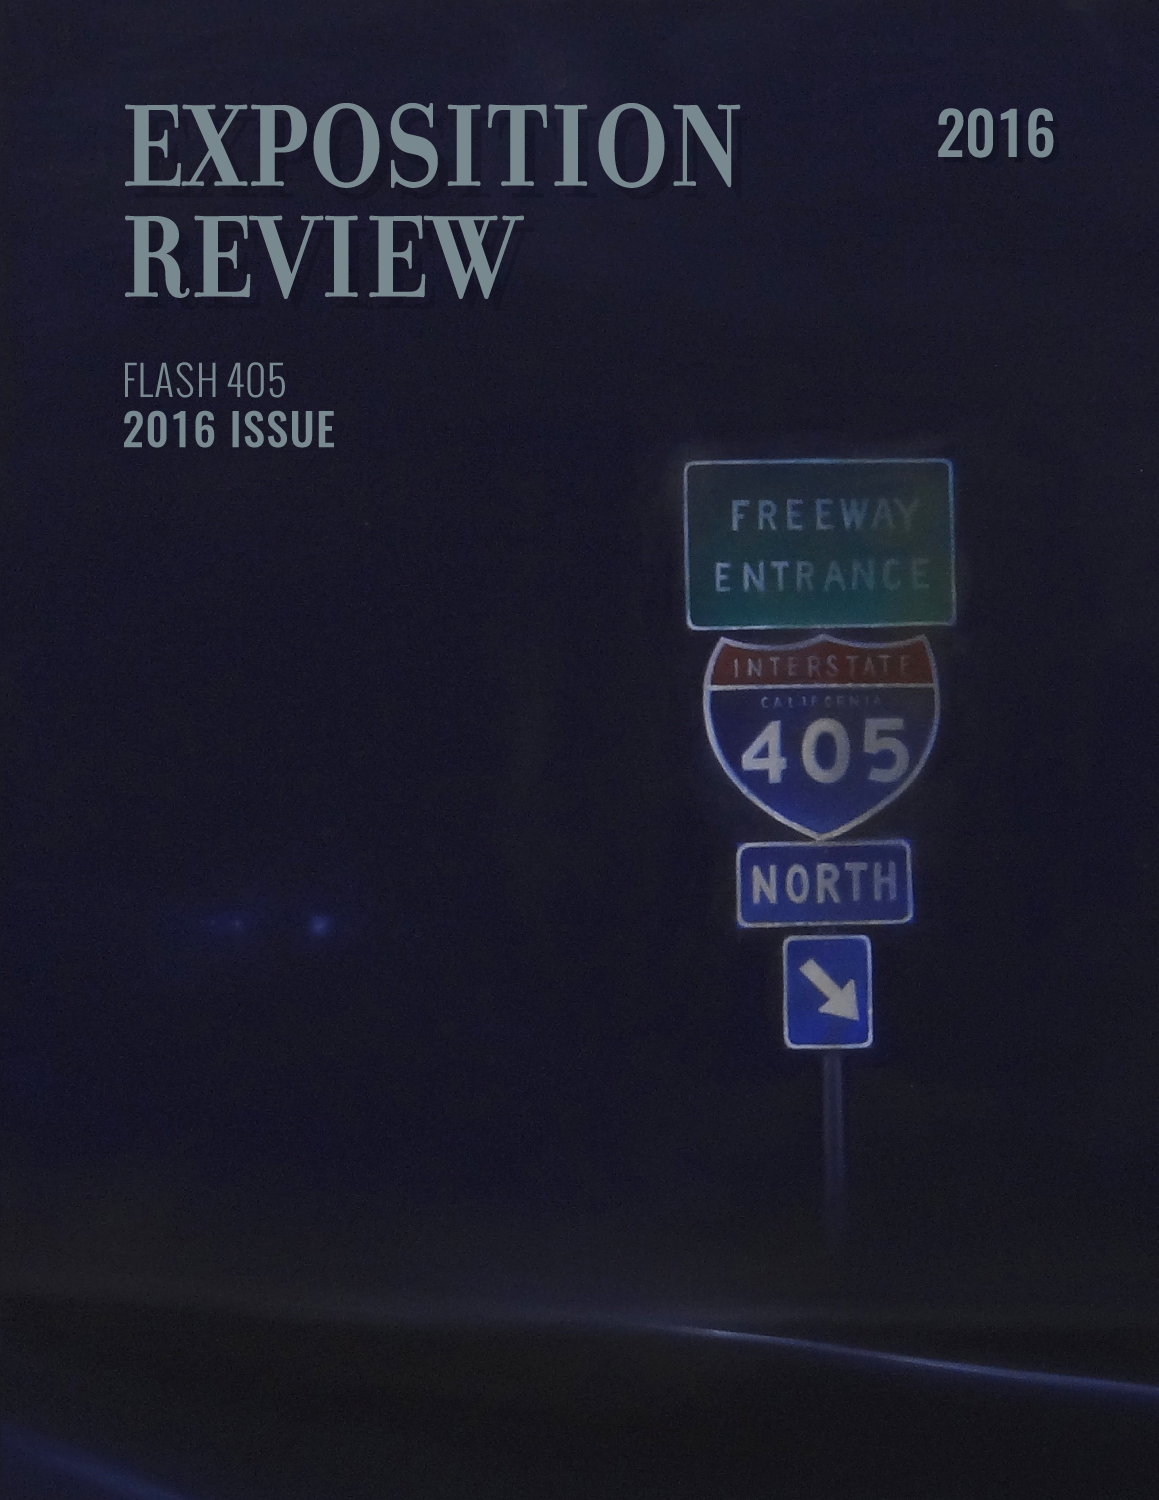 Exposition Review Flash 405 2016 Issue